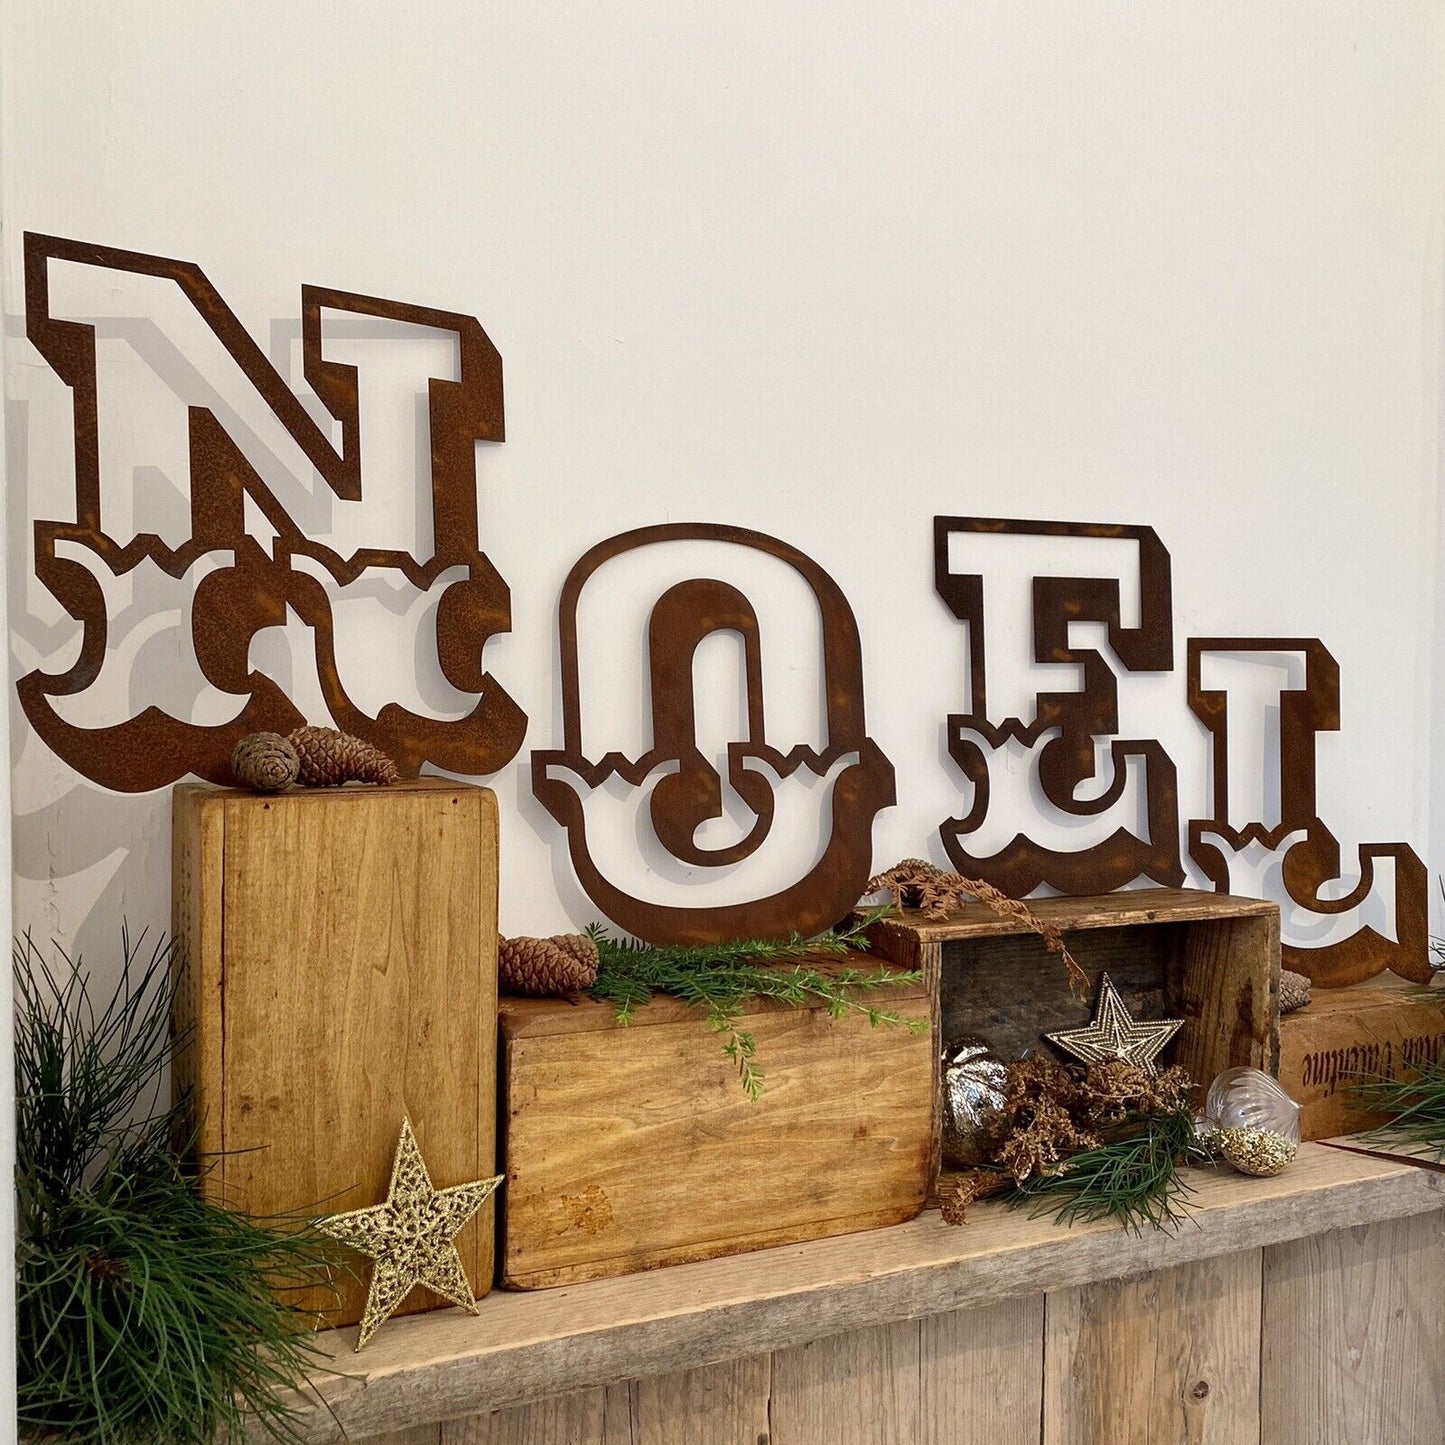 Christmas Fireplace Mantle Sign Decoration NOEL in 12 inch Tall Rustic Rusted Carnival Letters